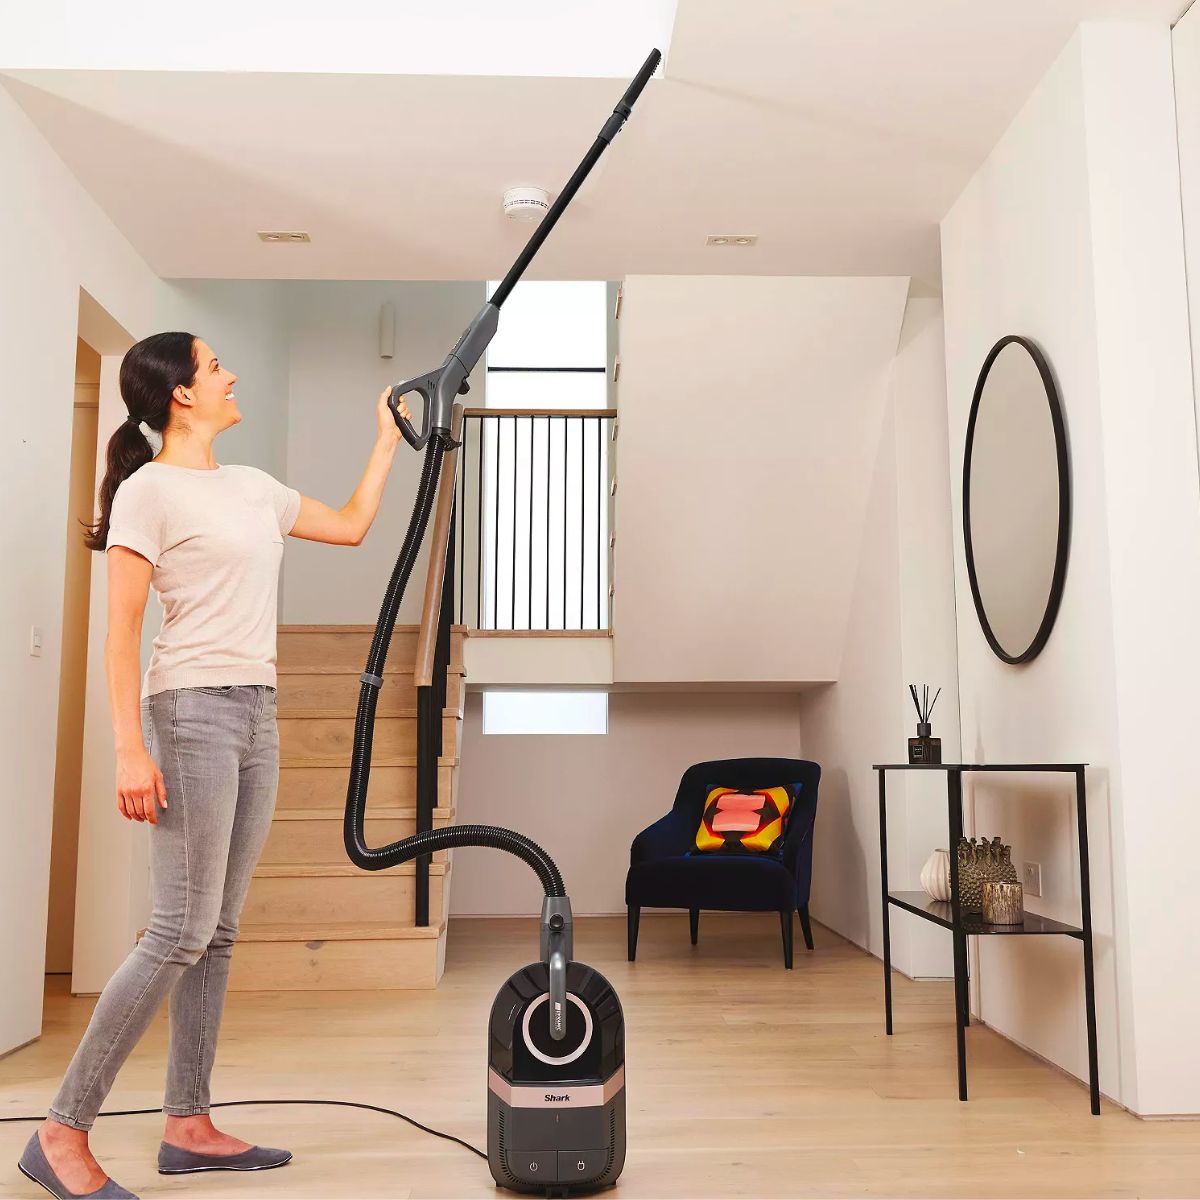 Woman vacuuming ceiling beams with a Shark Bagless Corded Canister Vacuum